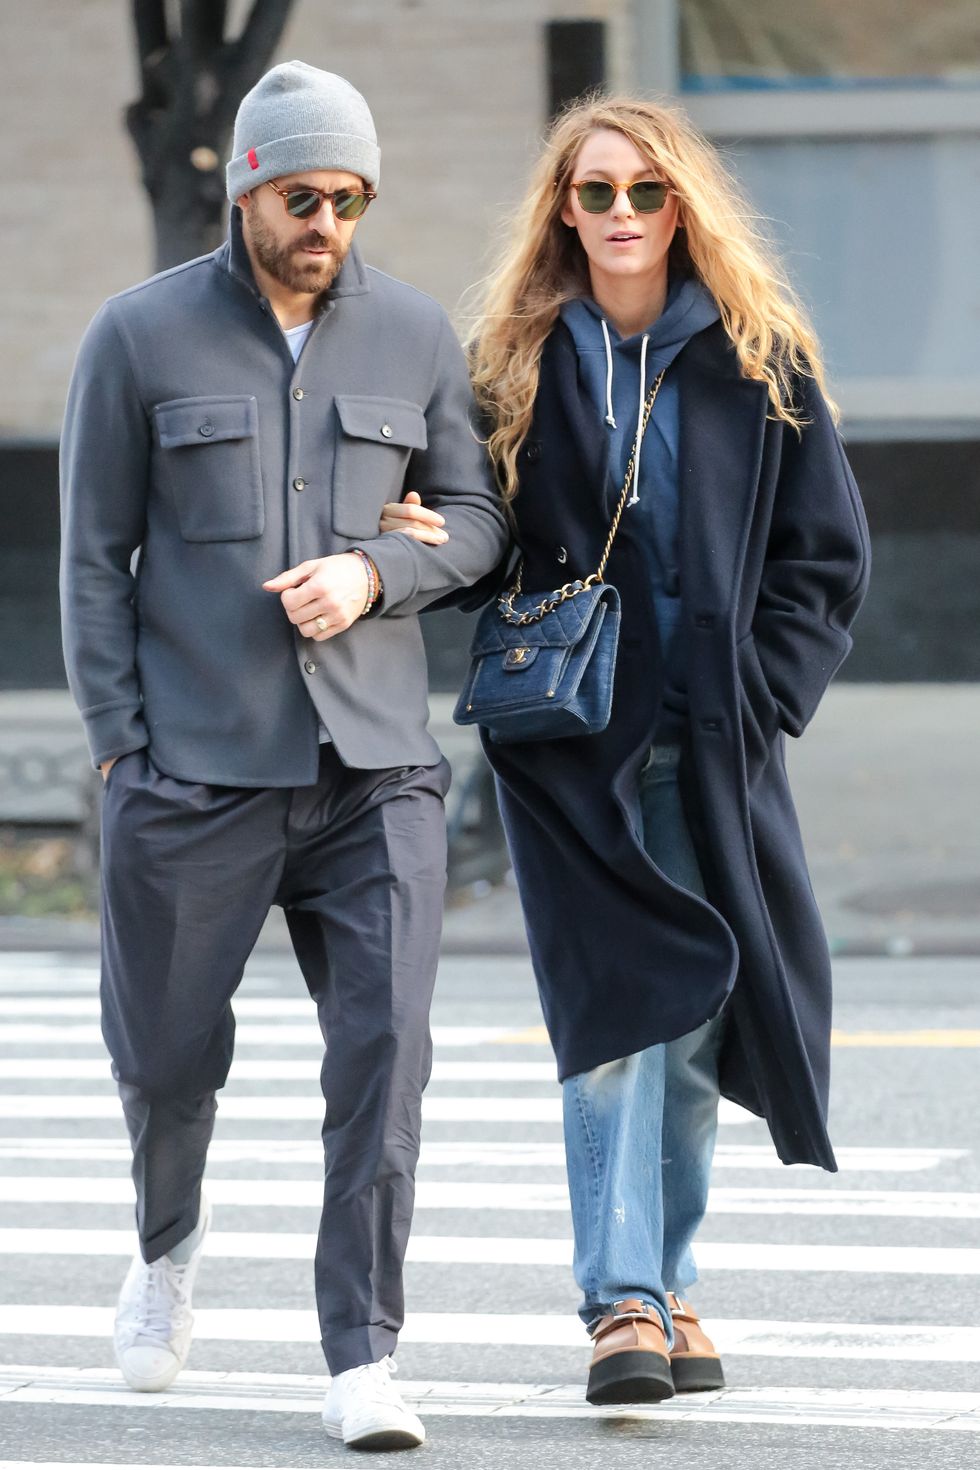 new york, ny october 24 ryan reynolds and blake lively are seen on october 24, 2023 in new york city photo by ignatbauer griffingc images